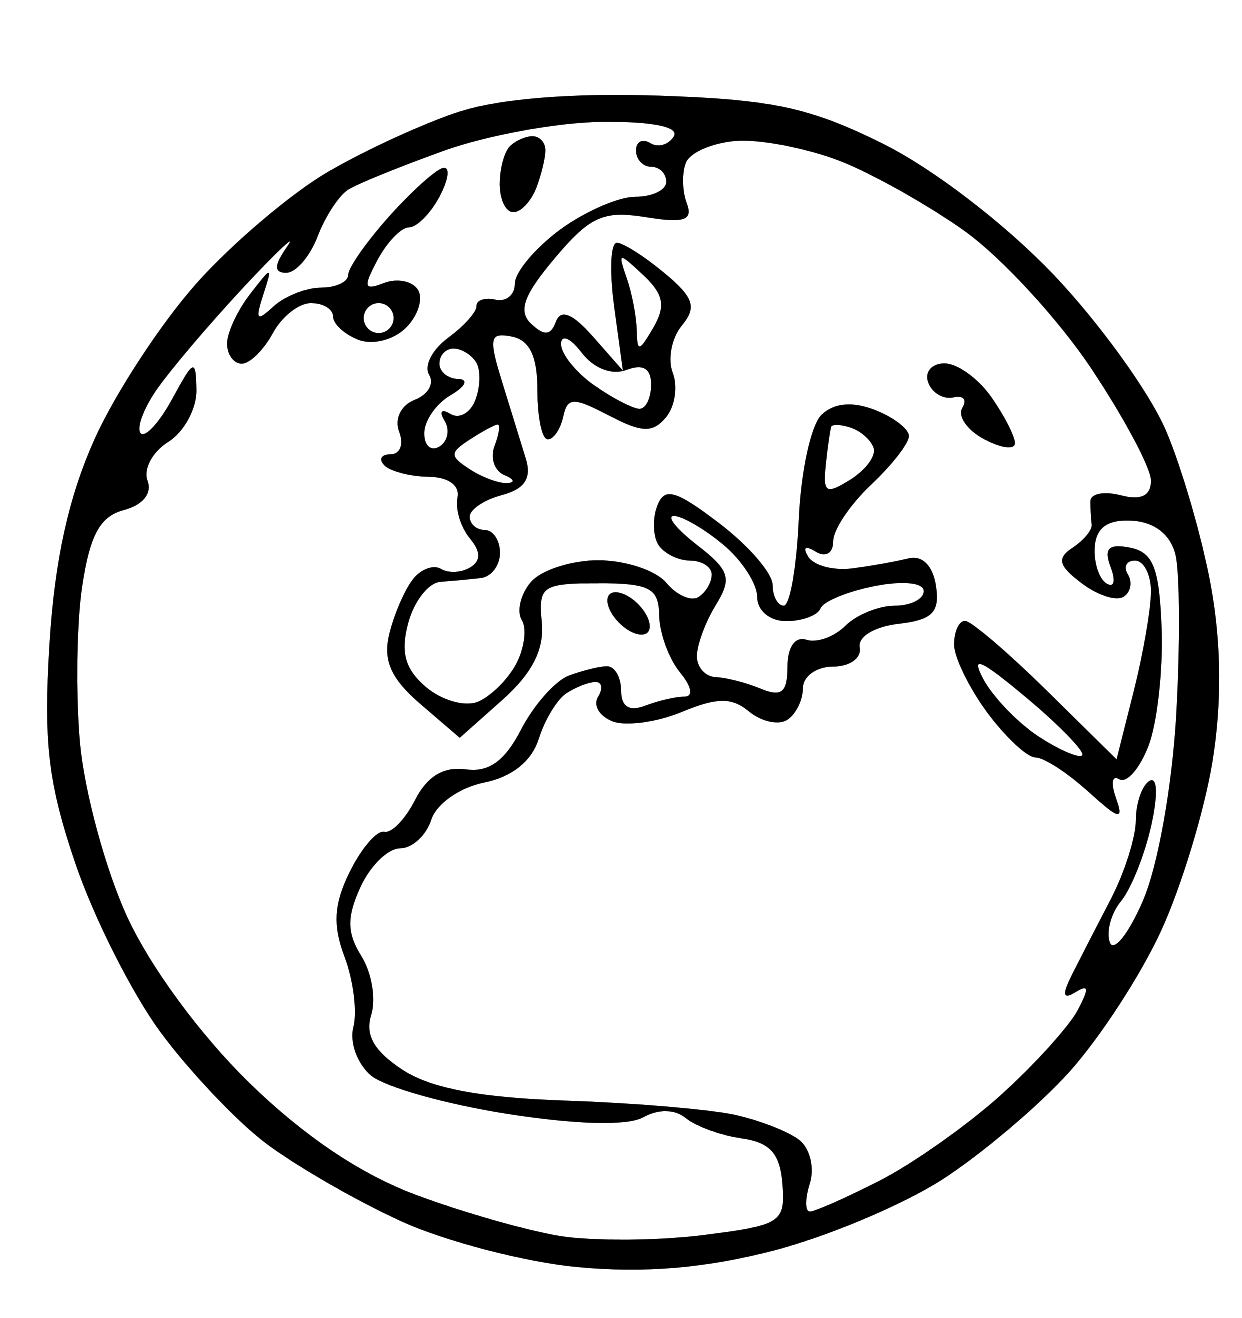 LDS Clipart: earth | Clipart Panda - Free Clipart Images